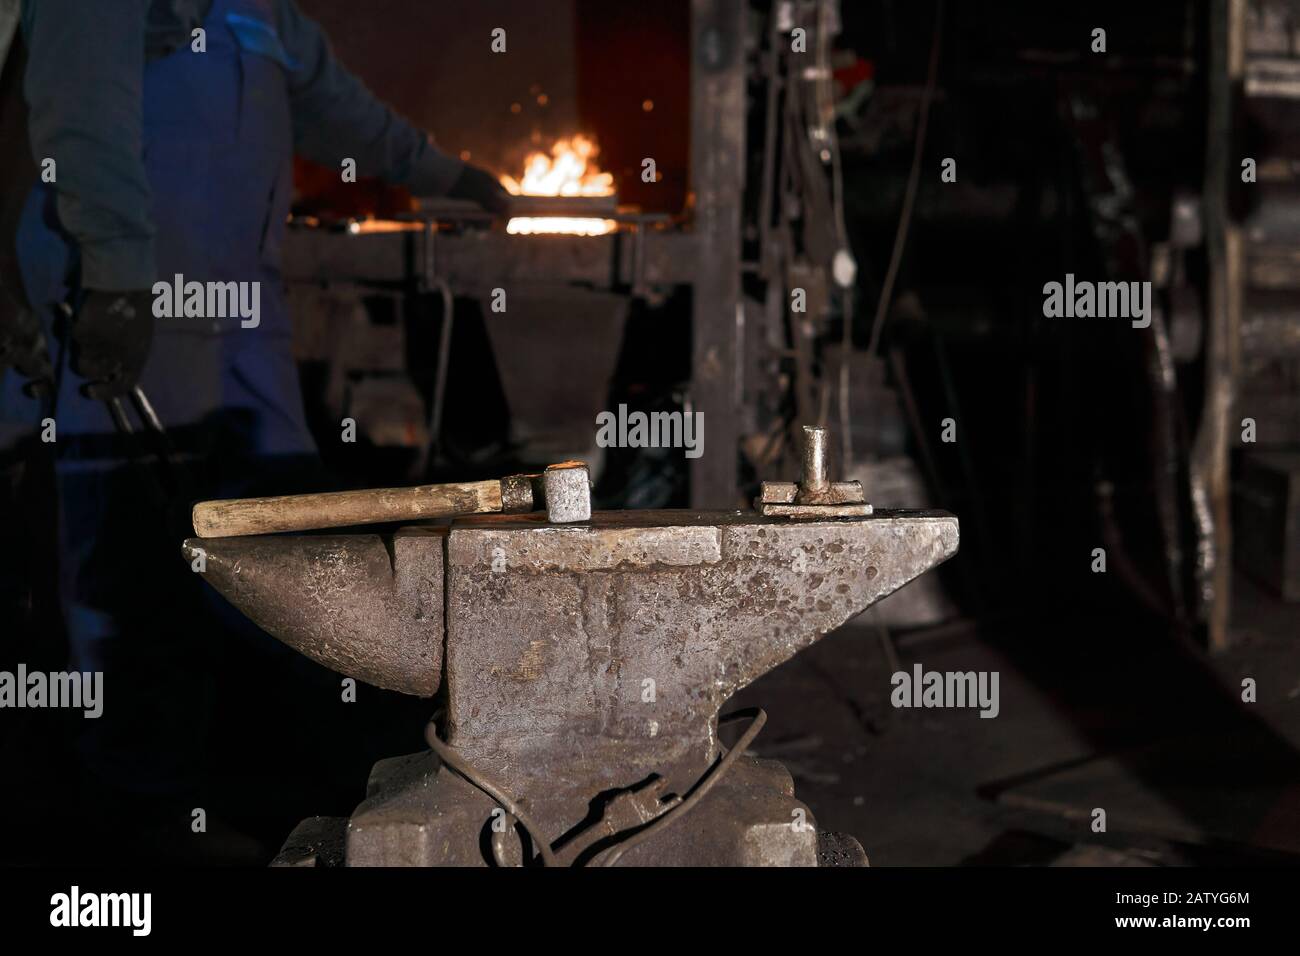 the hammer lies on the anvil in a traditional forge while the blacksmith went to the furnace in the background Stock Photo